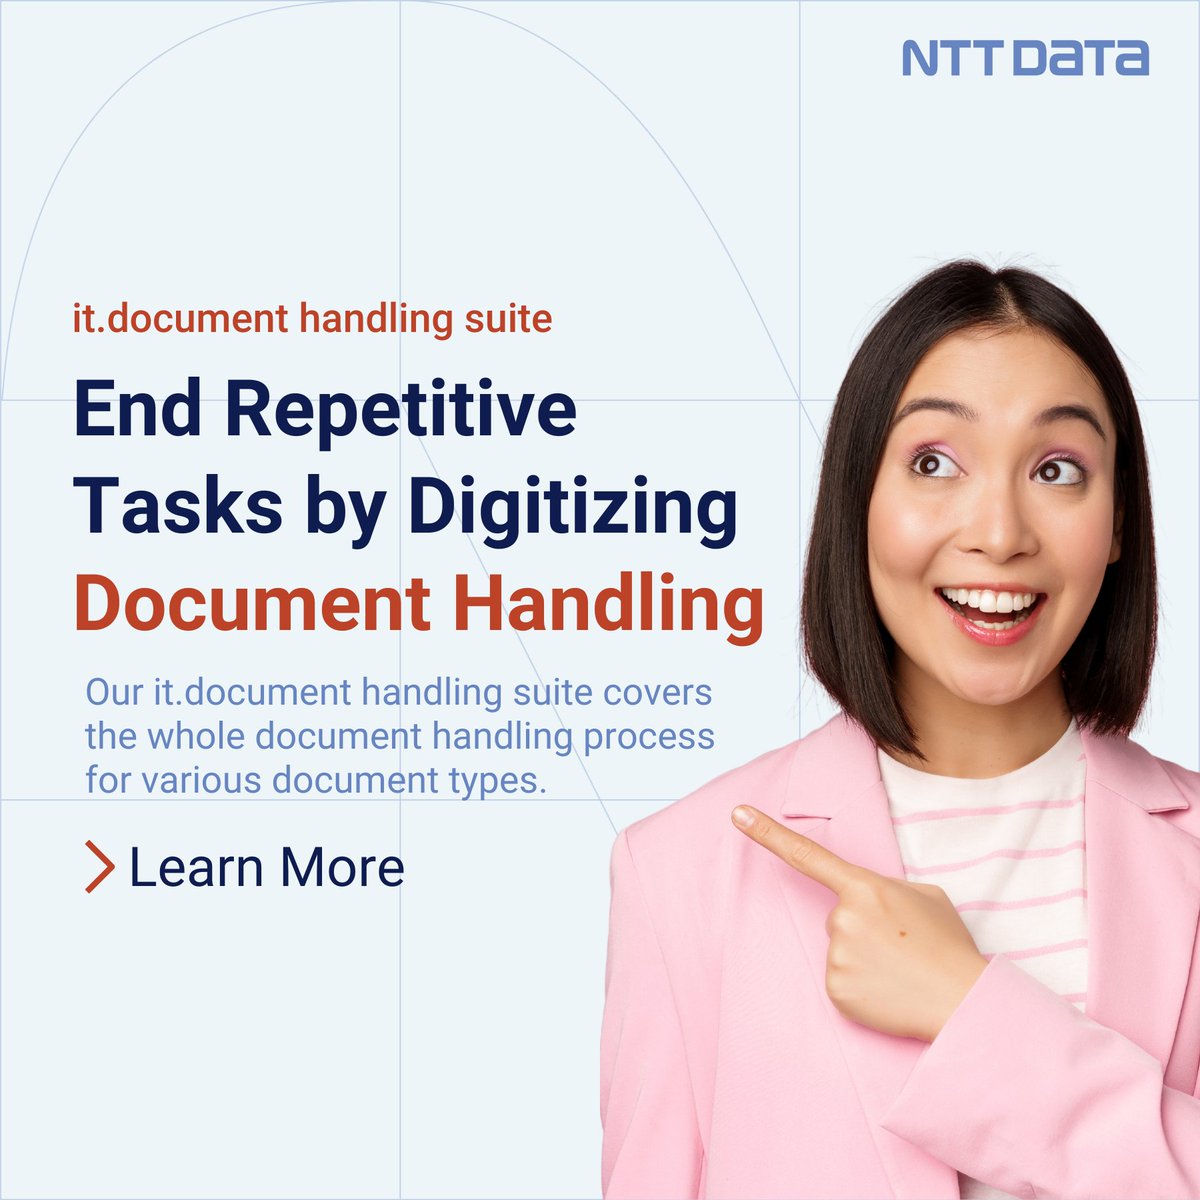 Save 60% of the time that you spend handling documents by automating the process with our it.document handling suite.

Find out more here: nttd.link/faiUO

#digitaltransformation #automation #documentmanagement #ERP #documenthandling